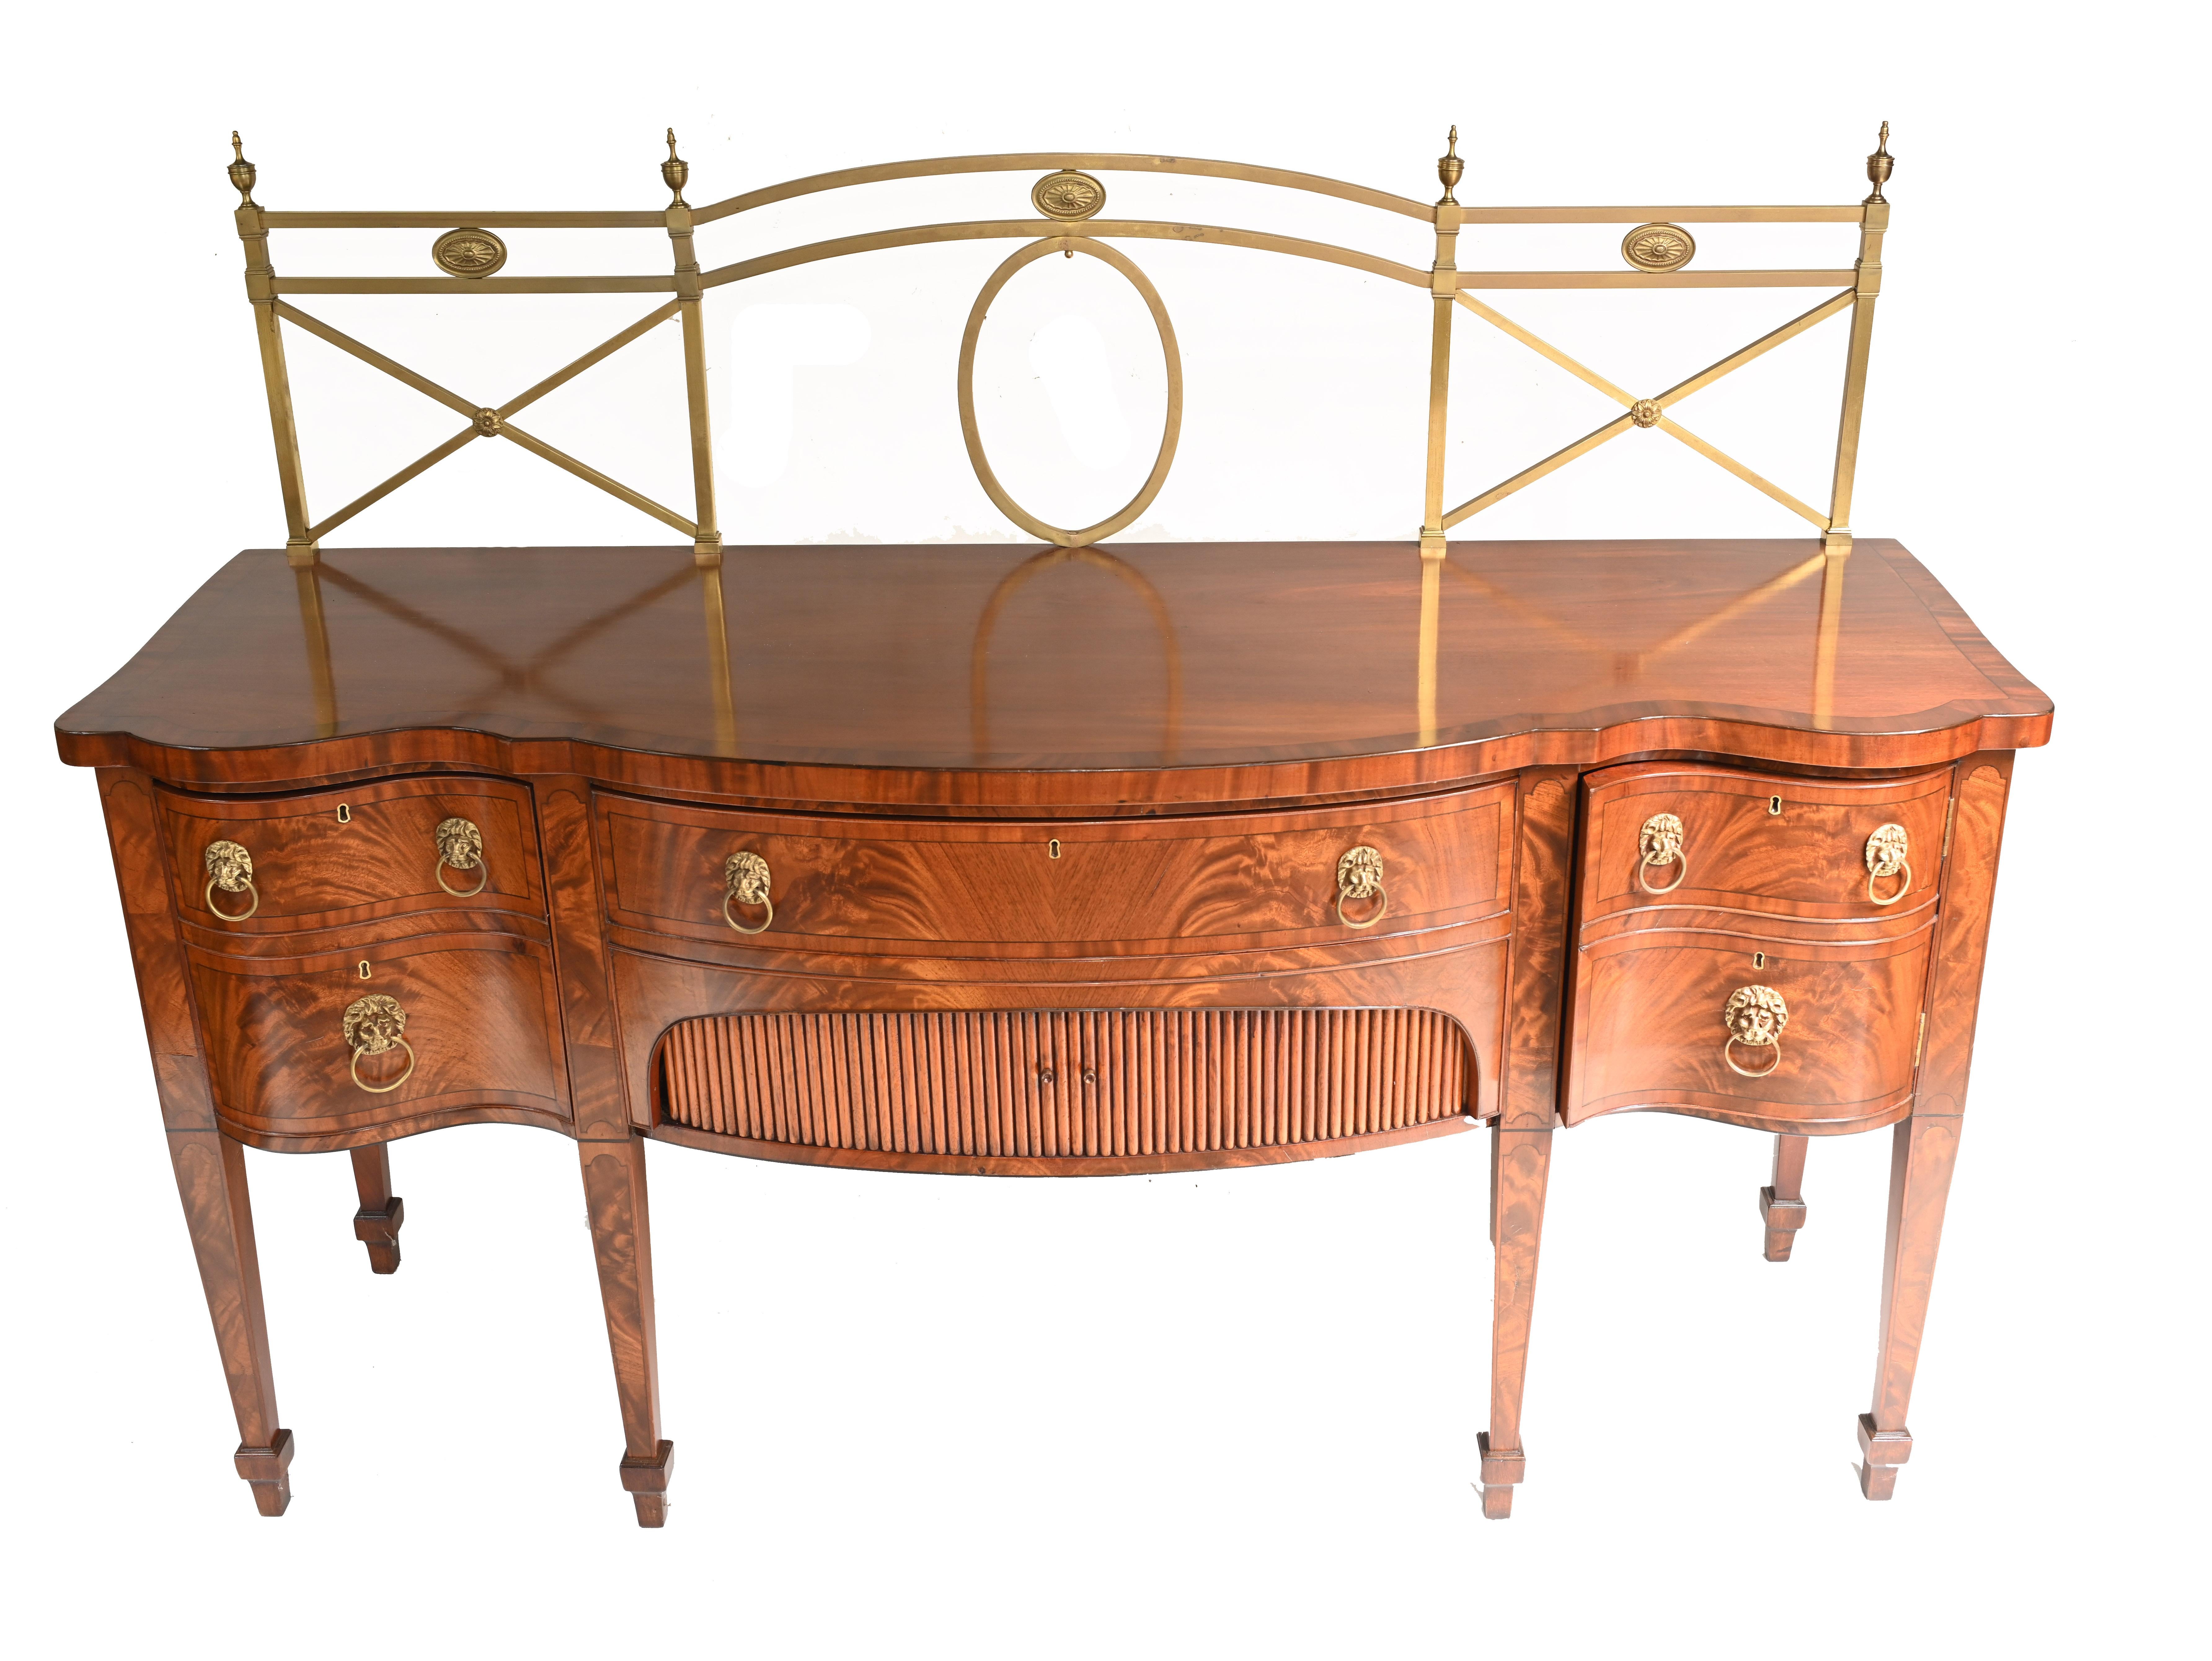 Classy Georgian sideboard in mahogany
Features the original brass gallery
Classic lions head handles 
Big piece with lots of storage space and drawers
We date this piece to circa 1880
Some of our items are in storage so please check ahead of a